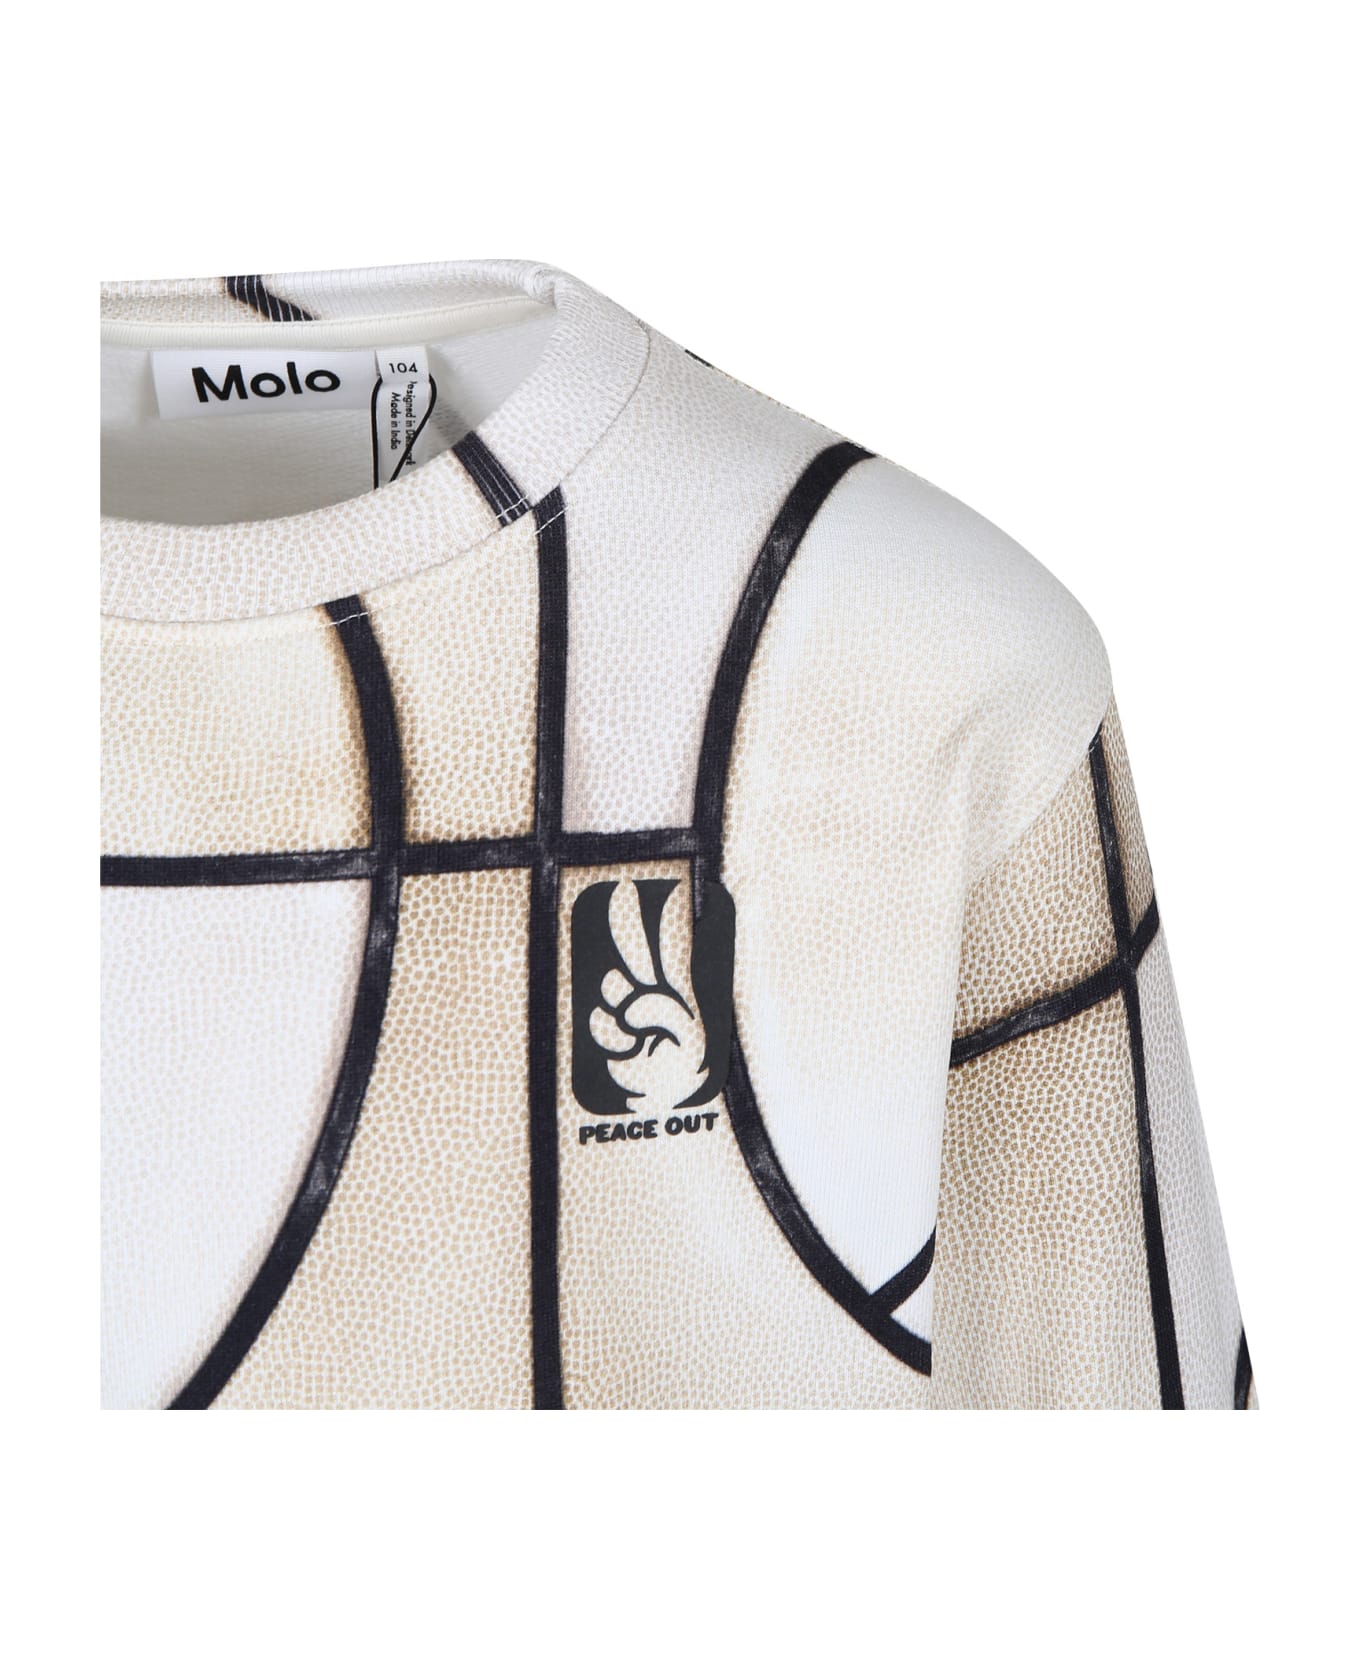 Molo Multicolor Monti Sweatshirt For Boy With Graphic Print - Ivory